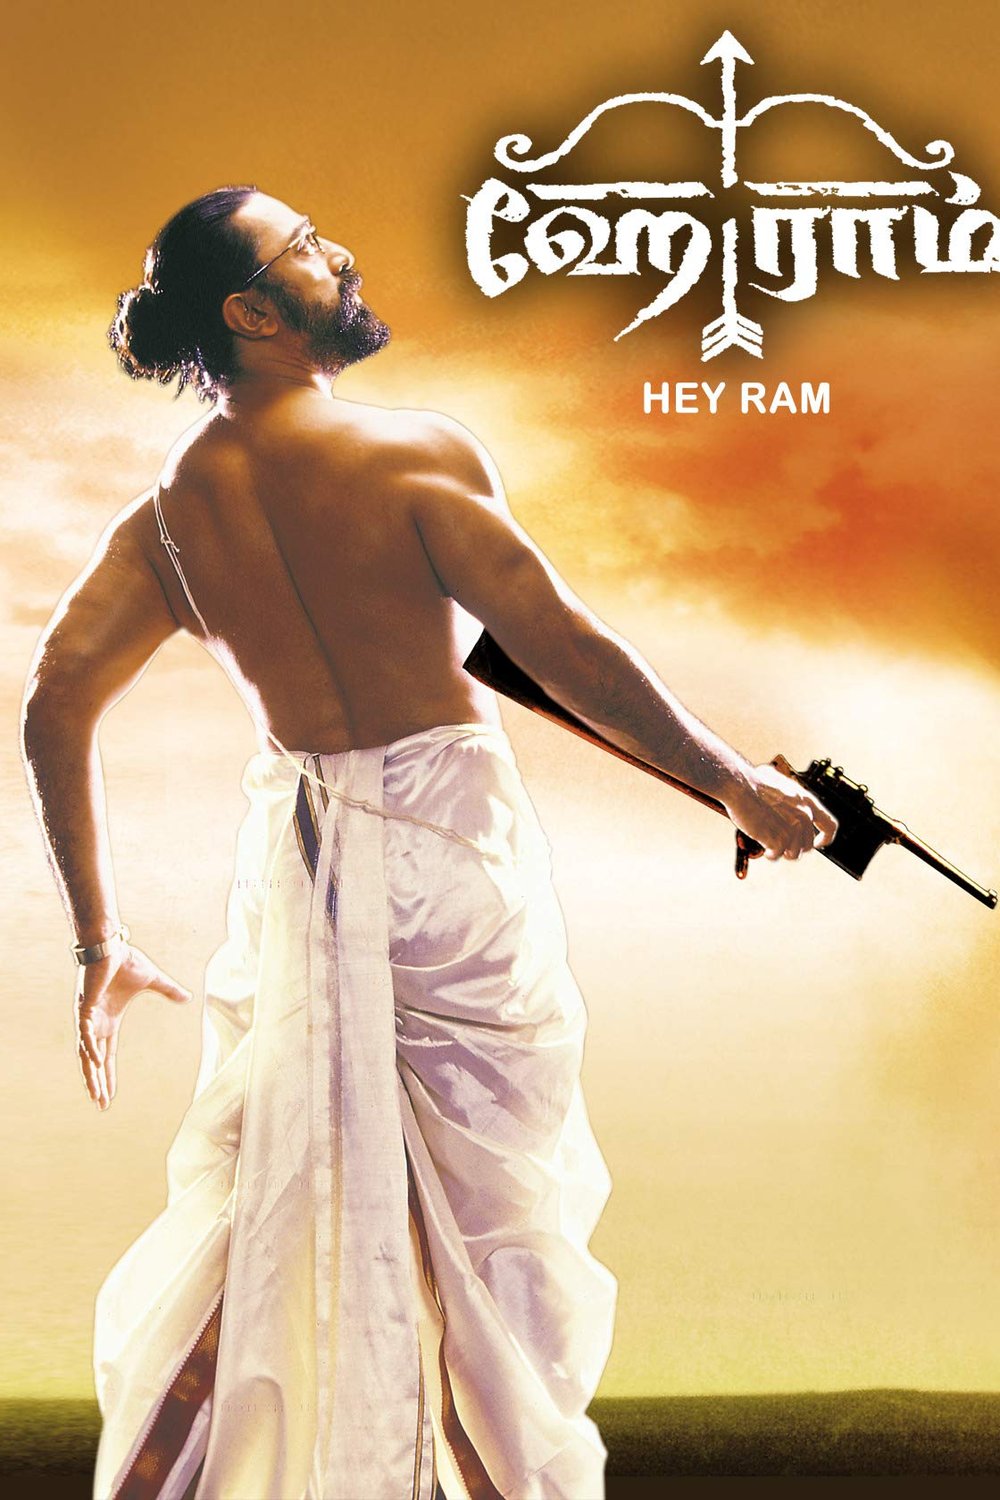 Tamil poster of the movie Hey Ram